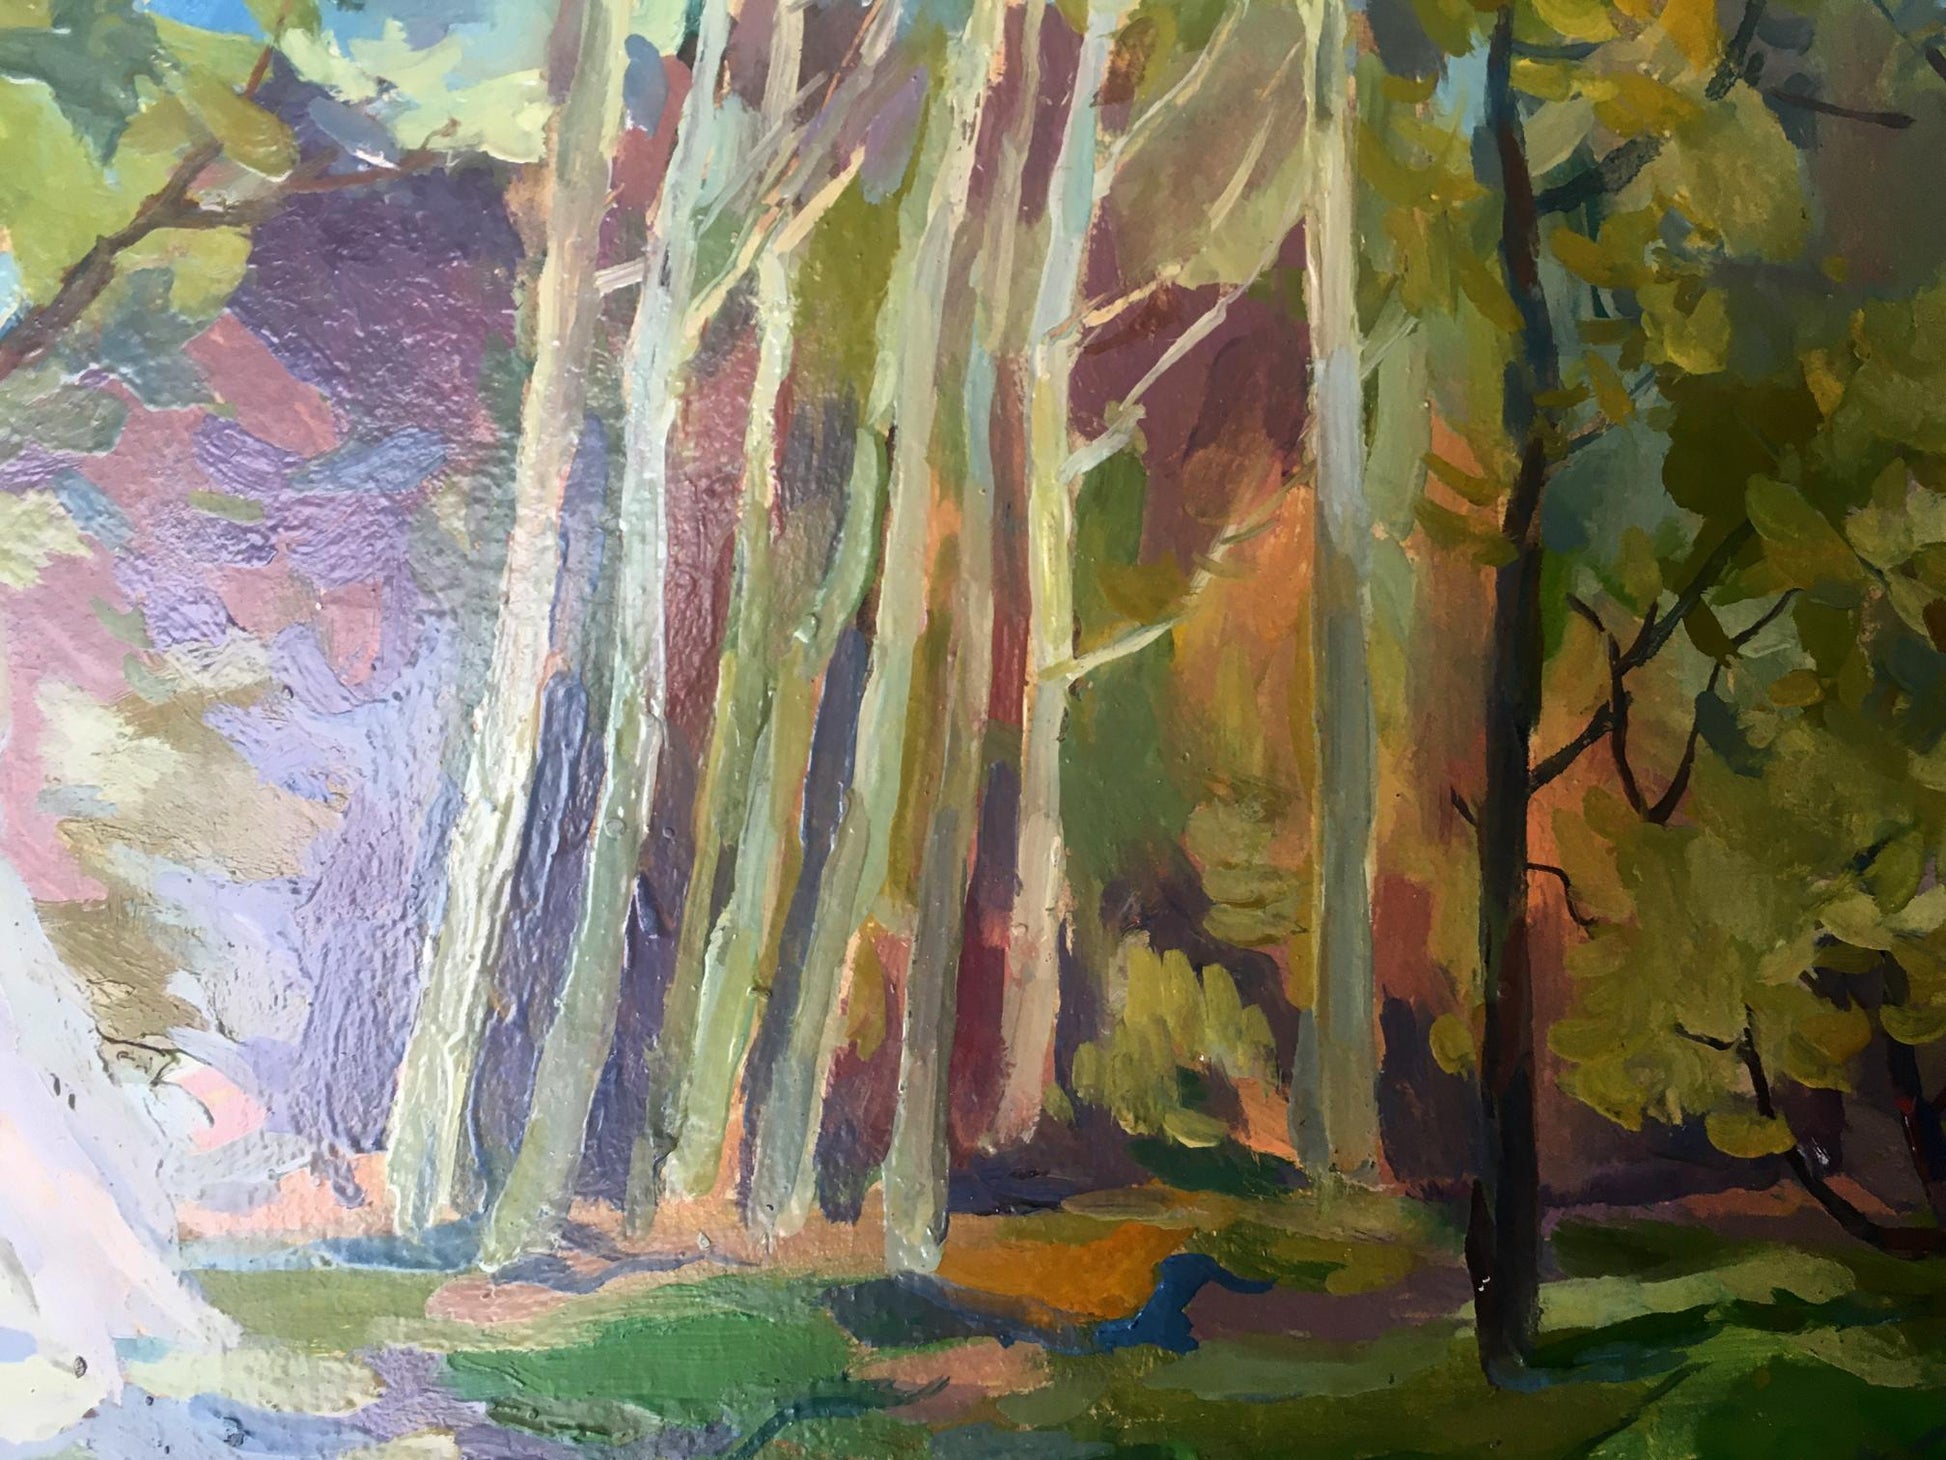 Peter Dobrev's oil masterpiece showcasing a peaceful forest walk